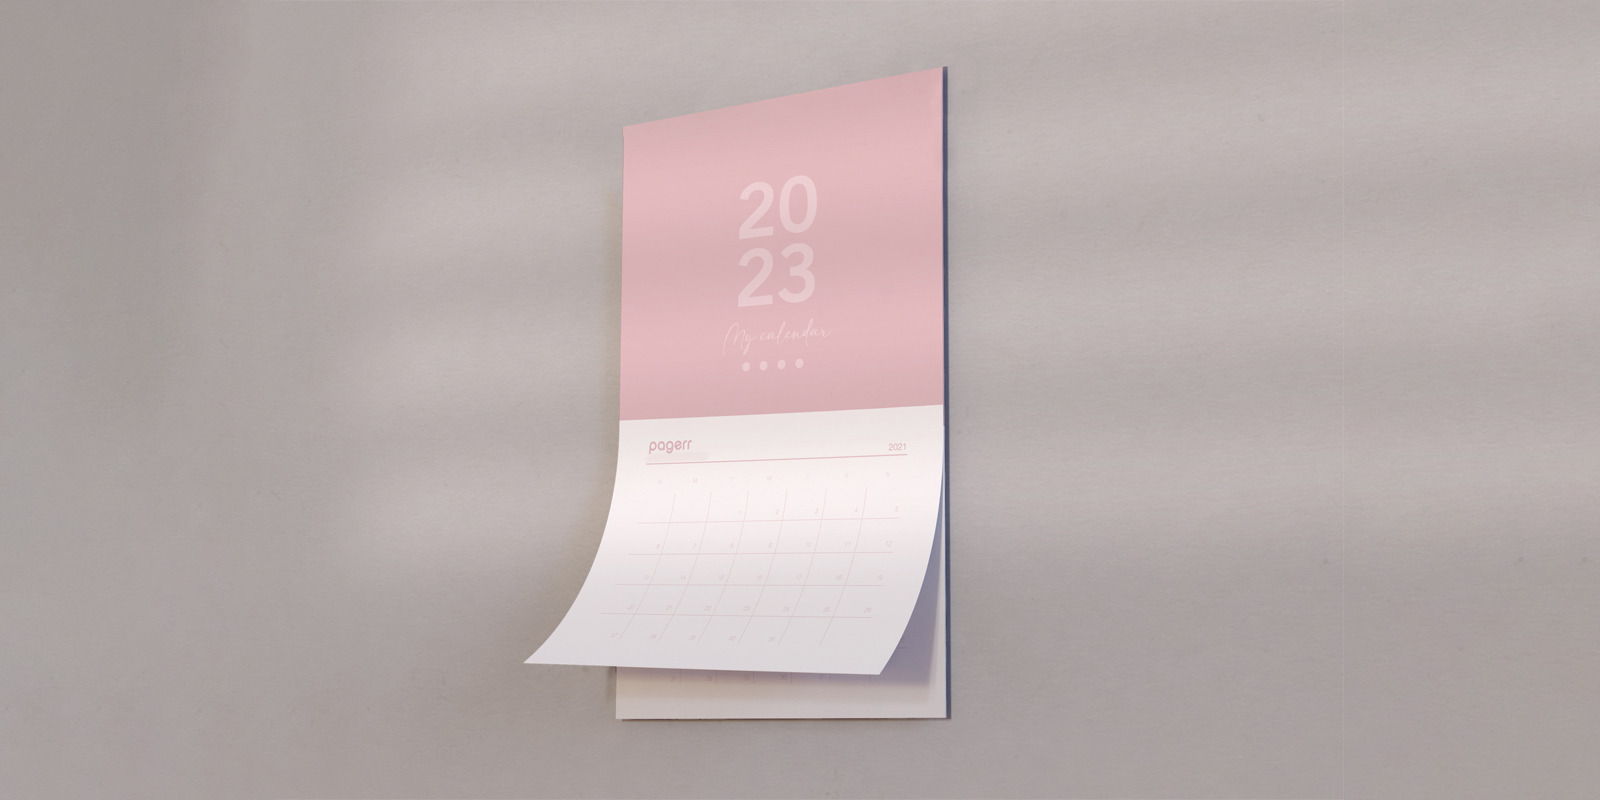 Magnetic calendars in Adelaide - Print with Pagerr